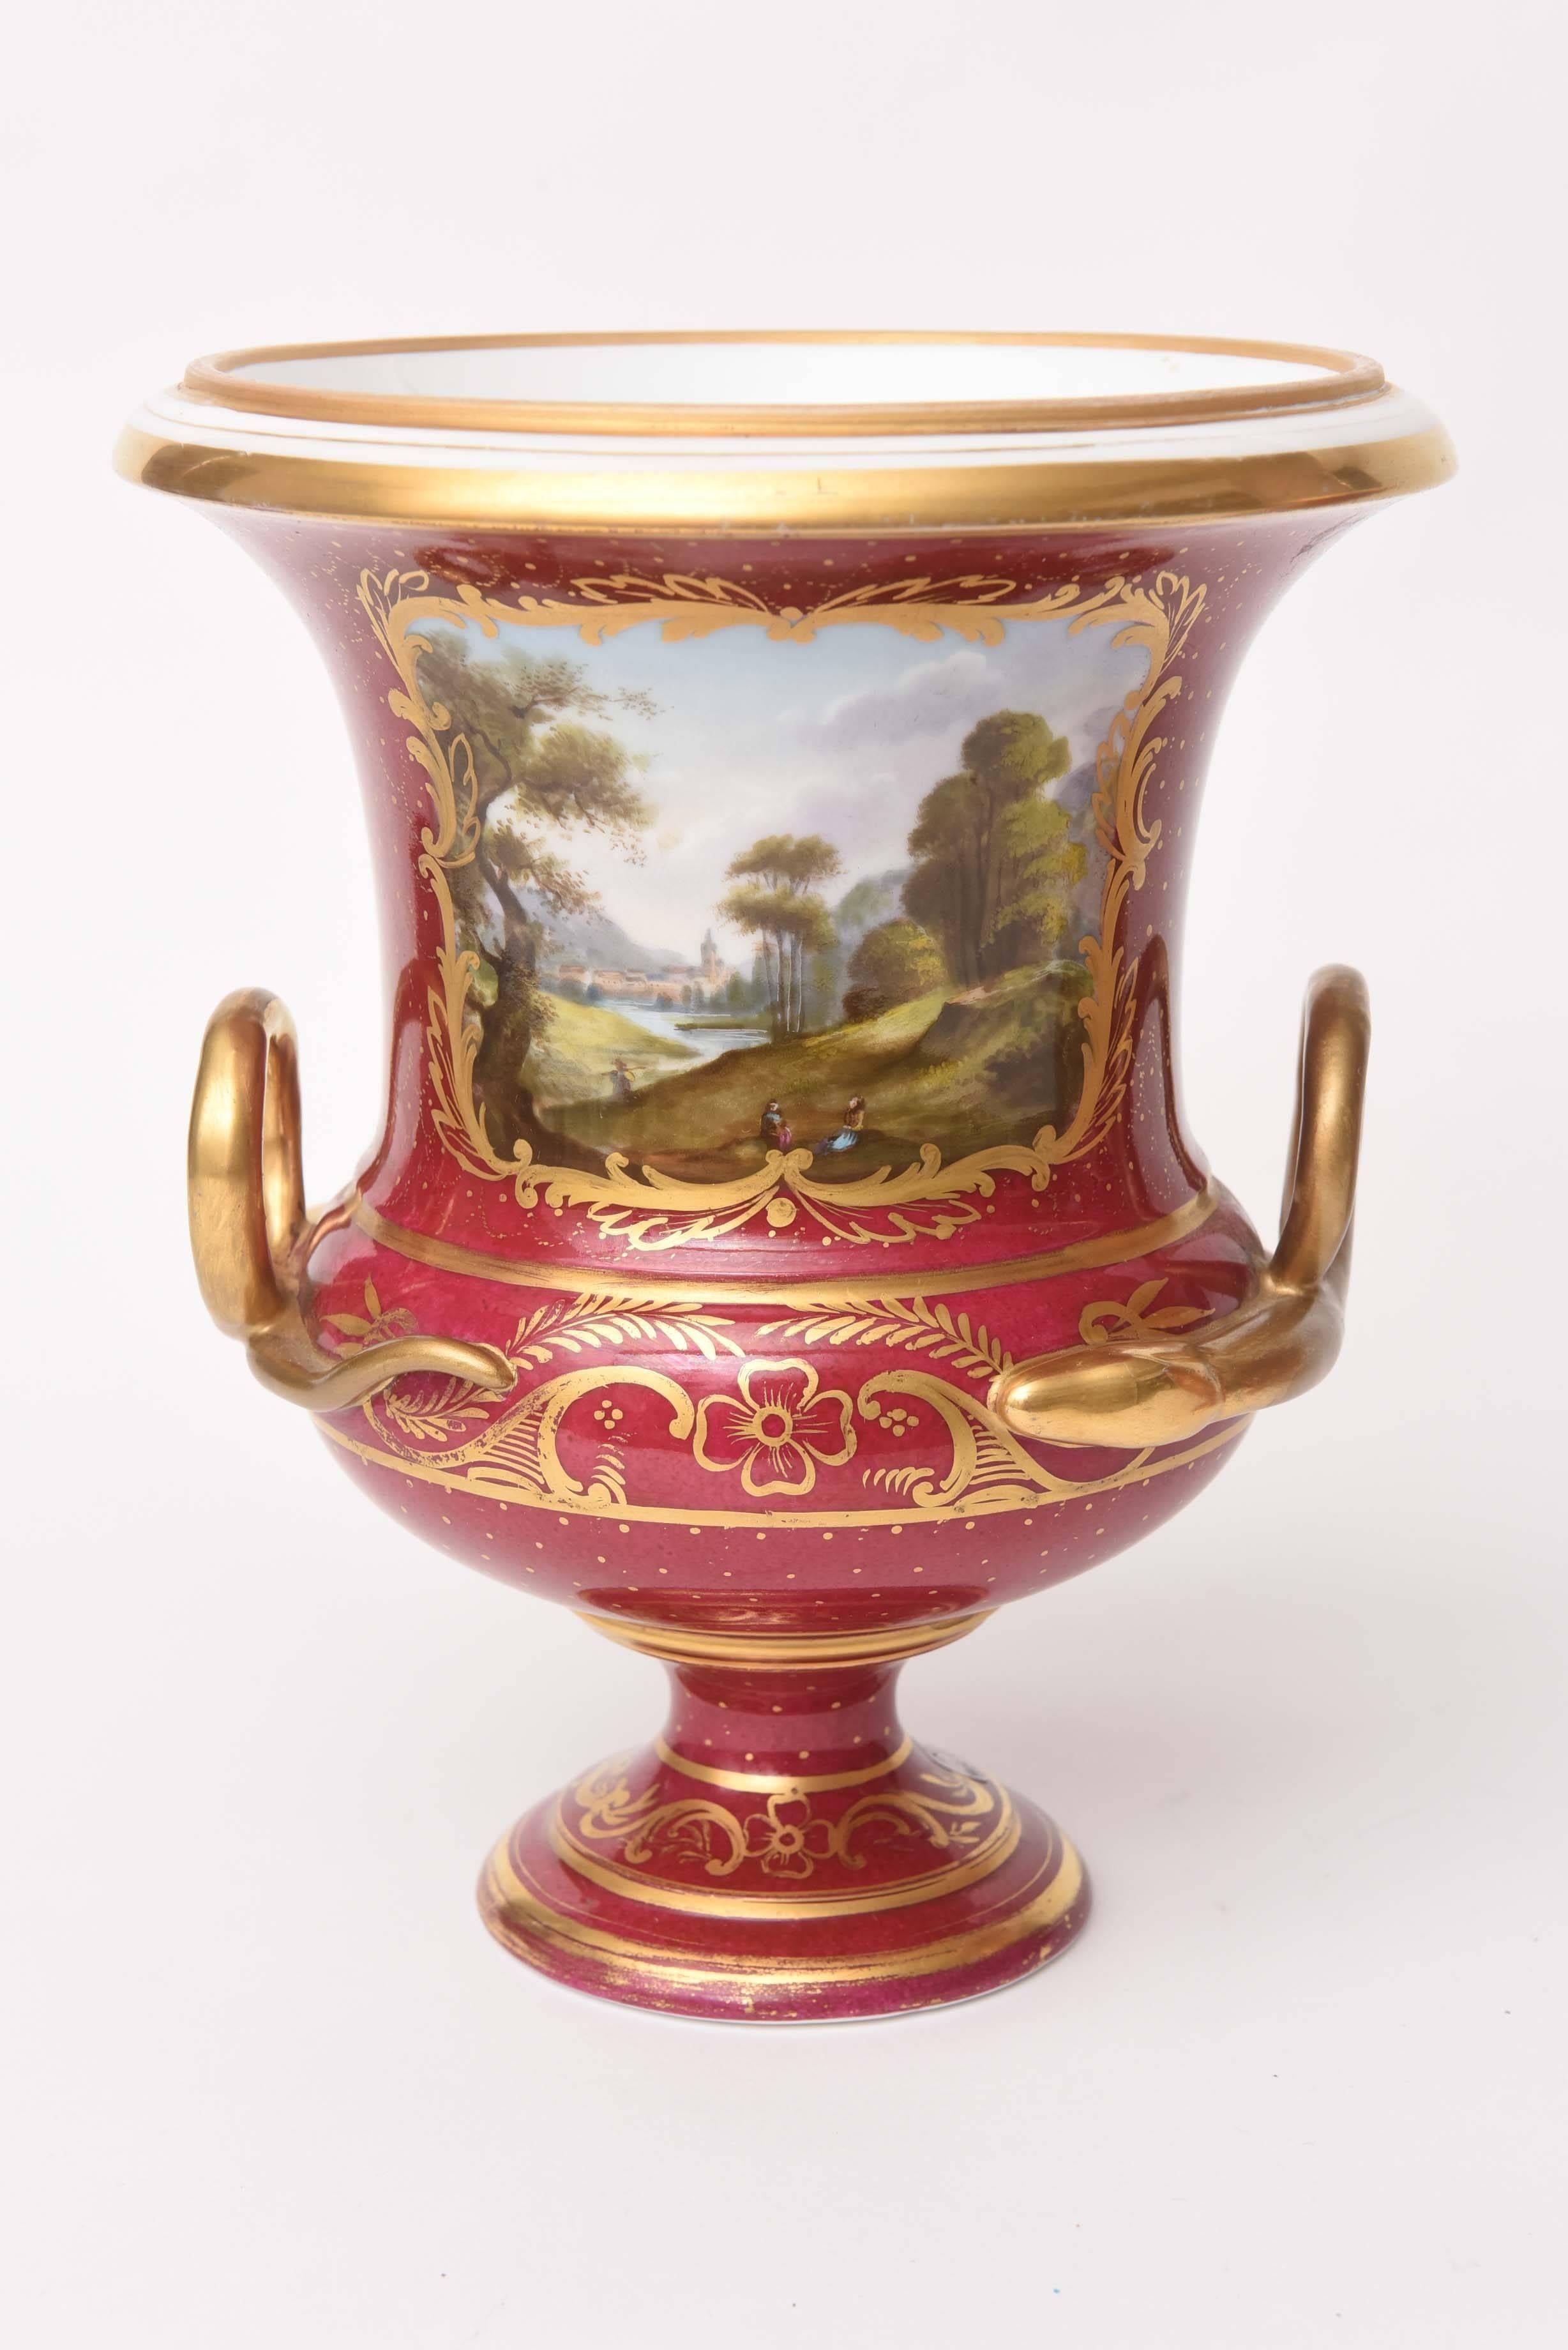 English Pair of 19th Century Urn Vases Rich Ruby Color with Hand-Painted Scenes Pedestal